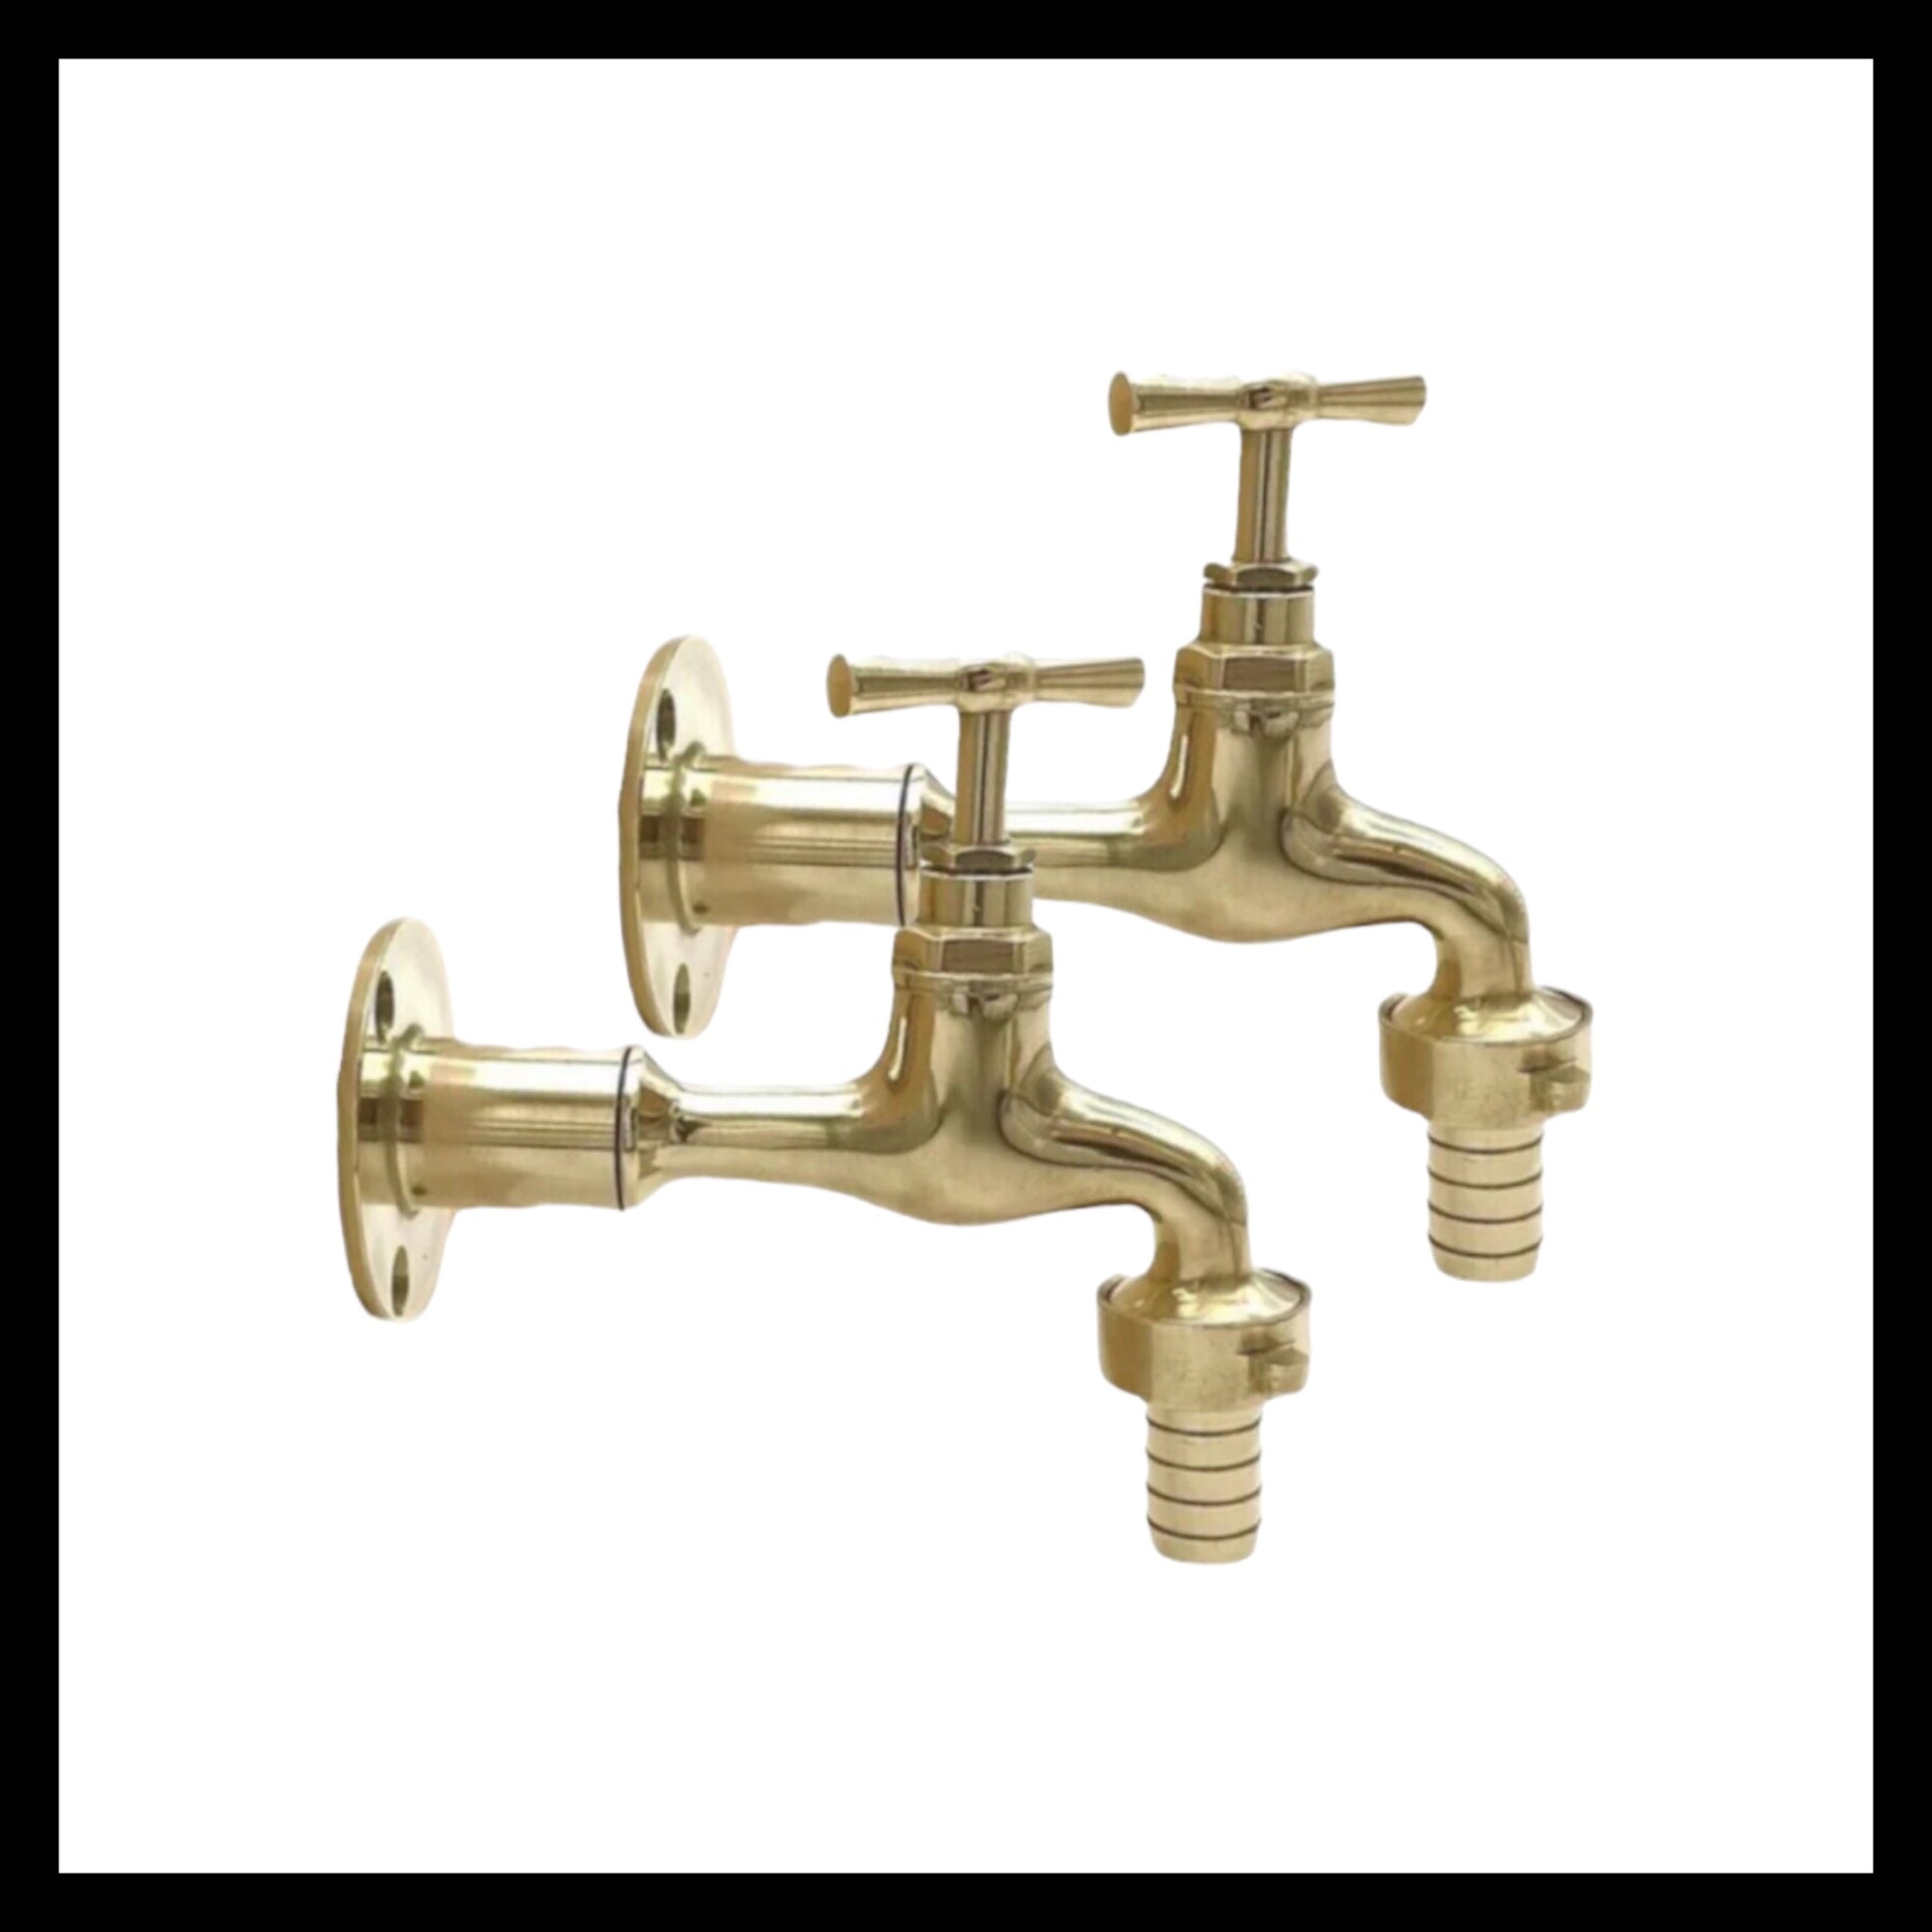 image pair of brass wall mounted taps sold by All Things French Store